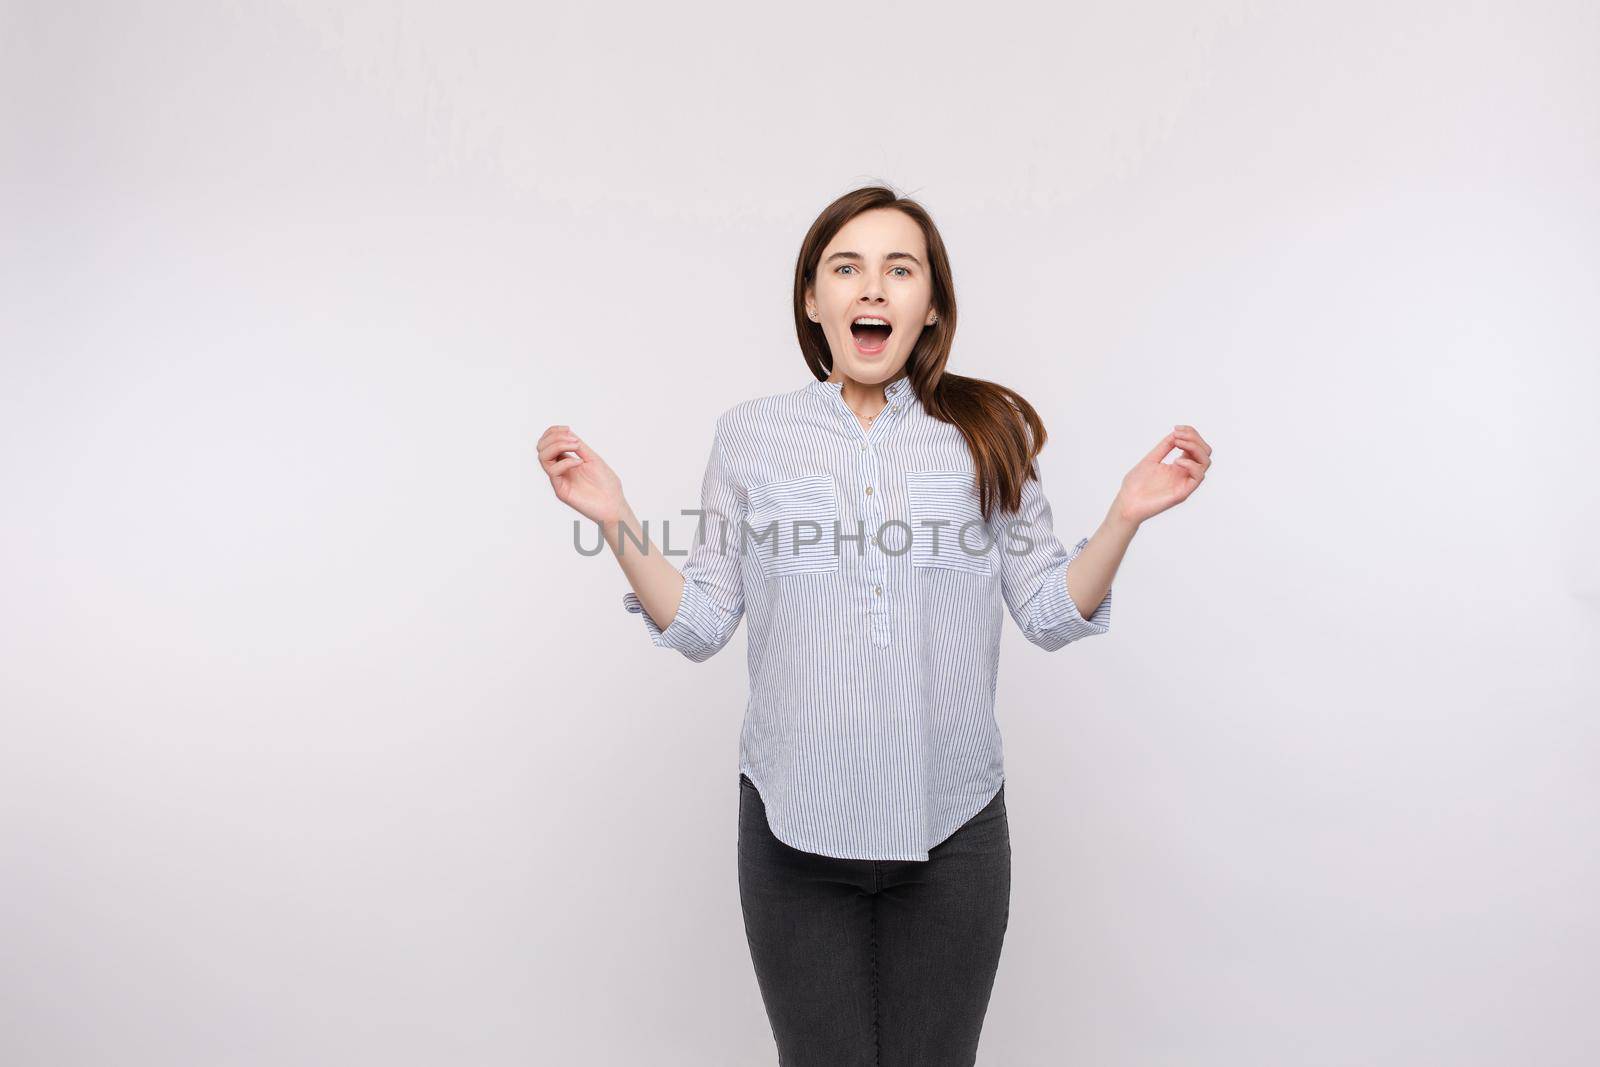 Studio portrait of a young girl with brunette hair wearing casual clothes jumping because of surprise. Astonished happy woman jumping in the air. Winning concept. Happiness.